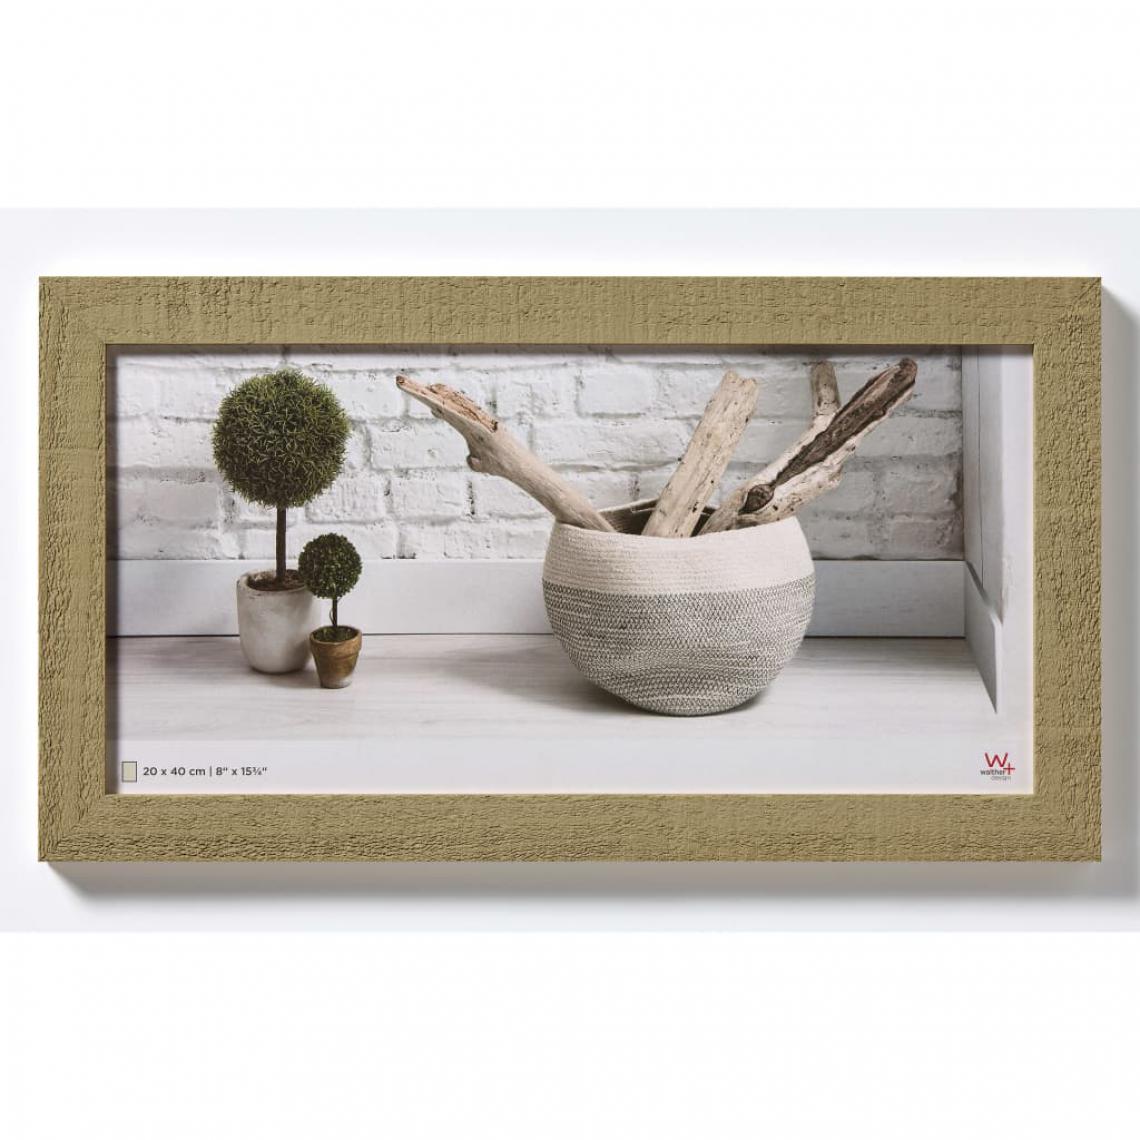 Walther - Walther Design Cadre photo Home 20x40 cm Marron beige - Cadres, pêle-mêle